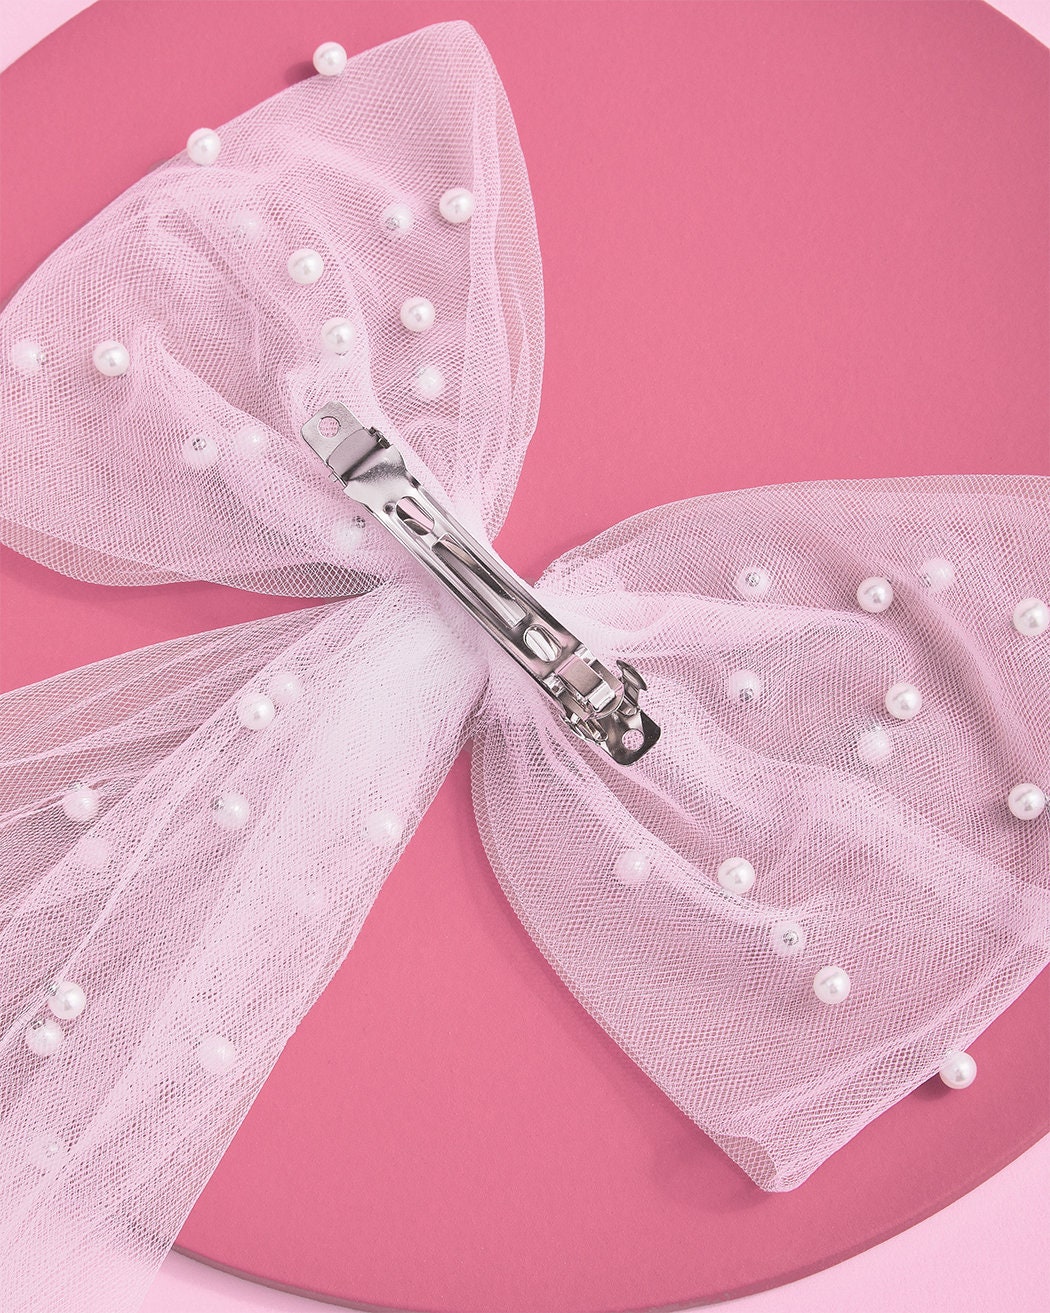 XO Fetti Bachelorette Party Decorations Pearl White Hair Bow - Bride to Be | Bridal Shower Gift Bridesmaid Favors